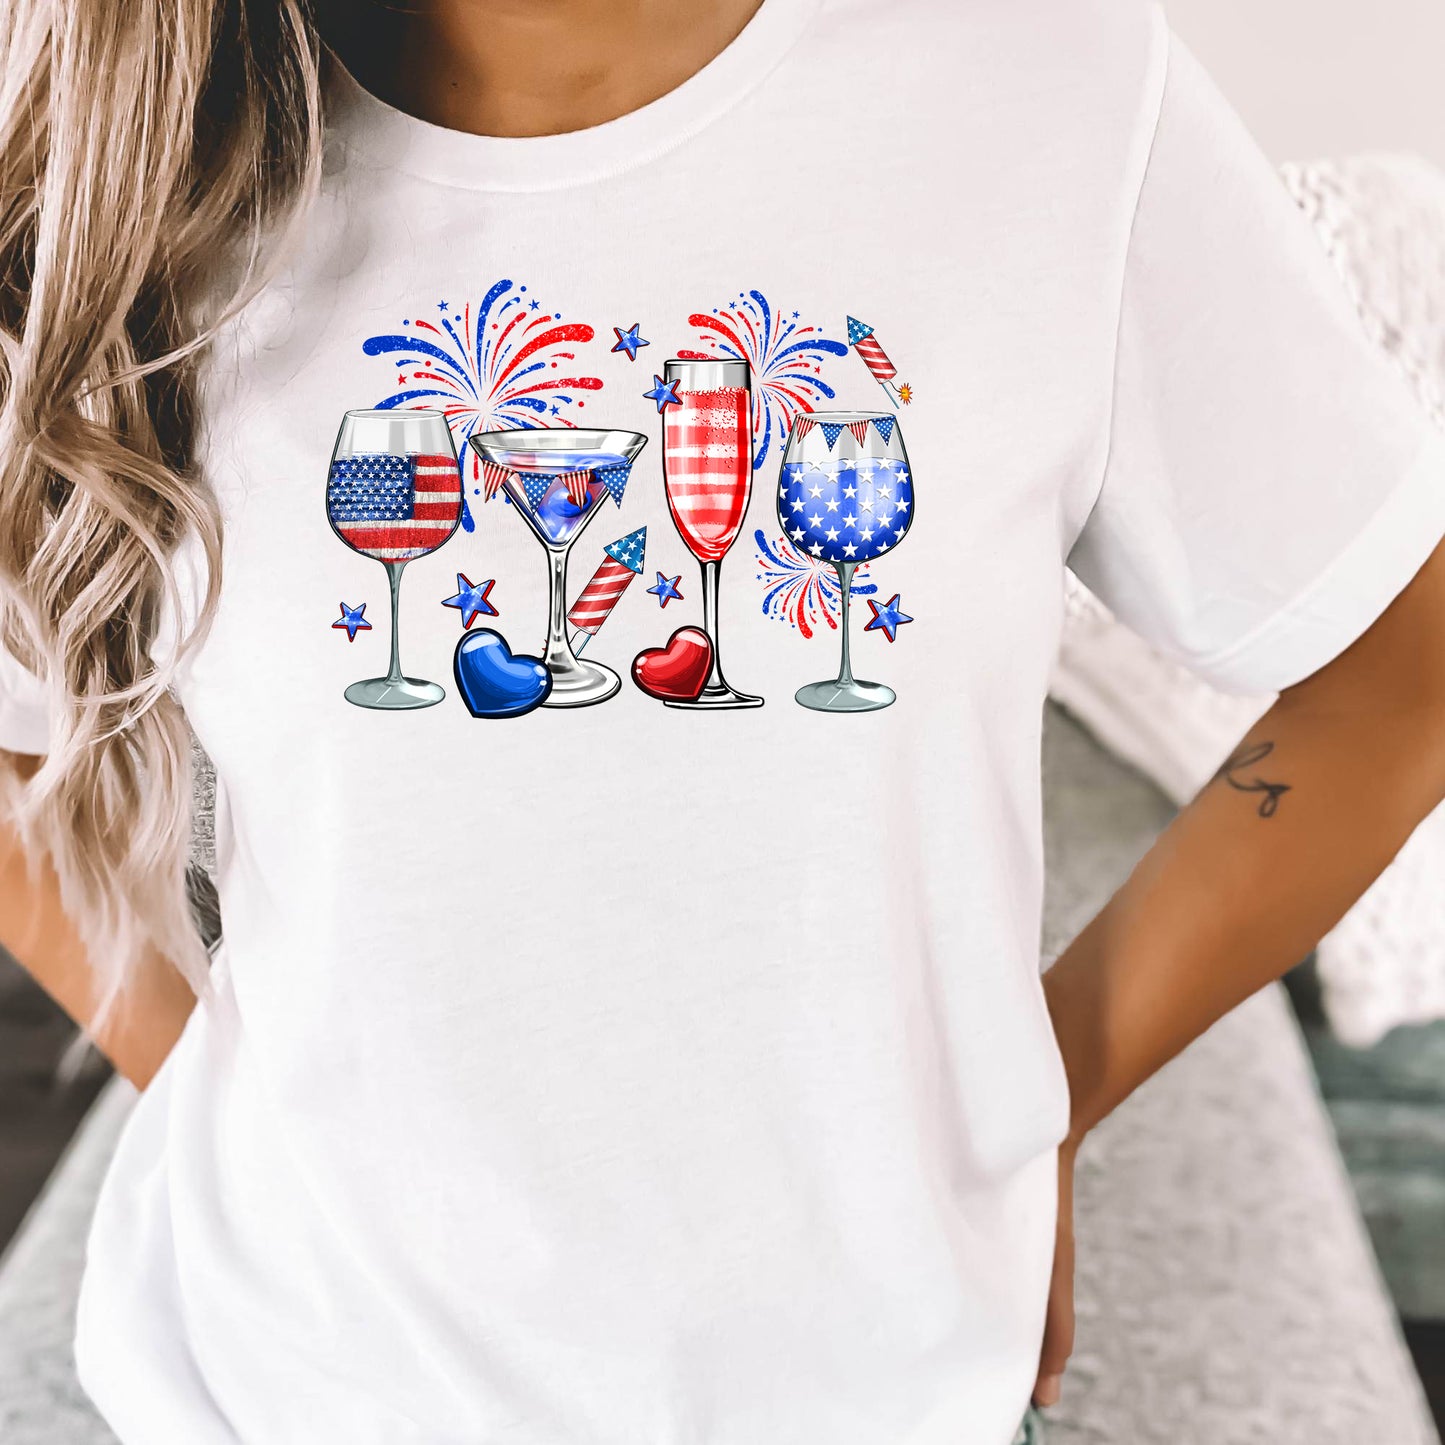 July 4th Celebration Drinking Shirt, Wine Lover Shirt, Martini Glass, Independence Day Party Shirt